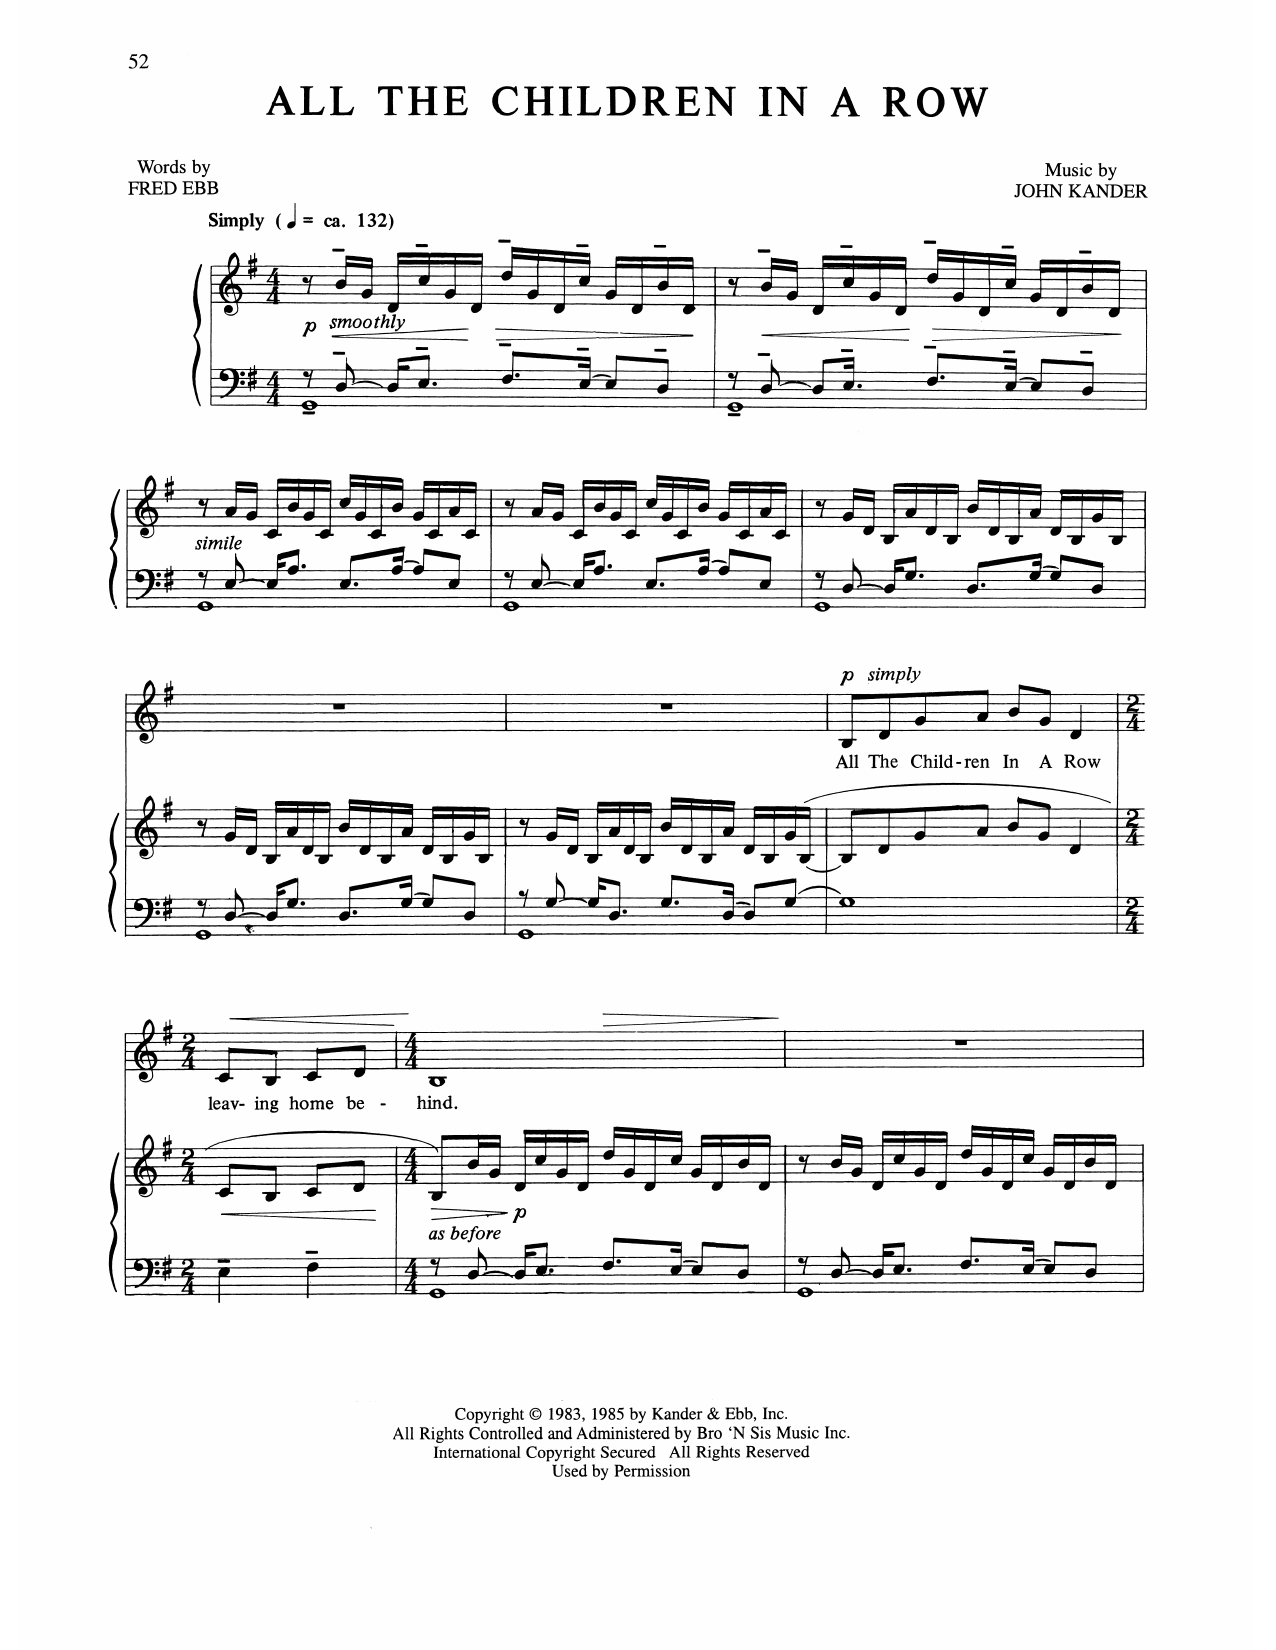 Download Kander & Ebb All The Children In A Row (from The Rin Sheet Music